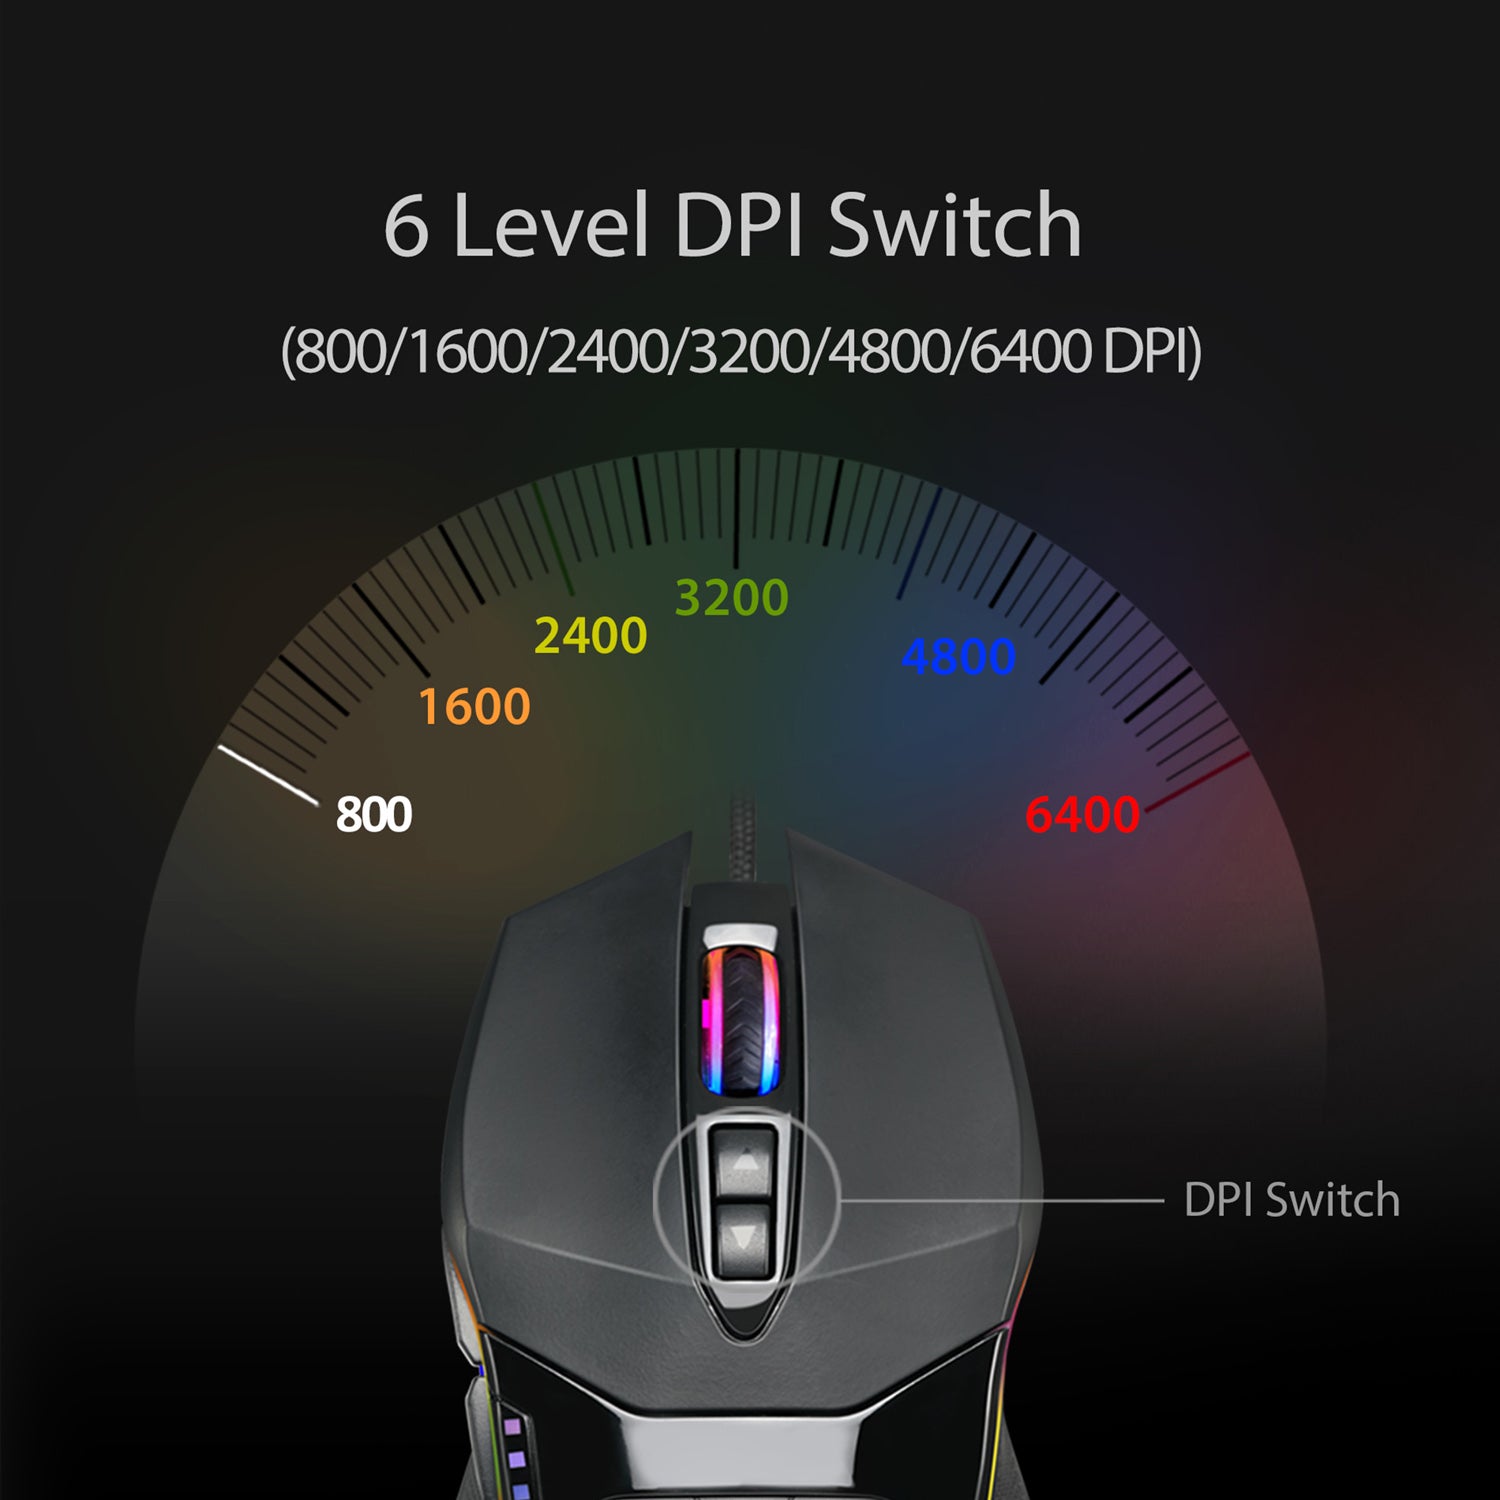 Adesso iMouse X5 RGB color 7-button illuminated gaming mouse SpadezStore